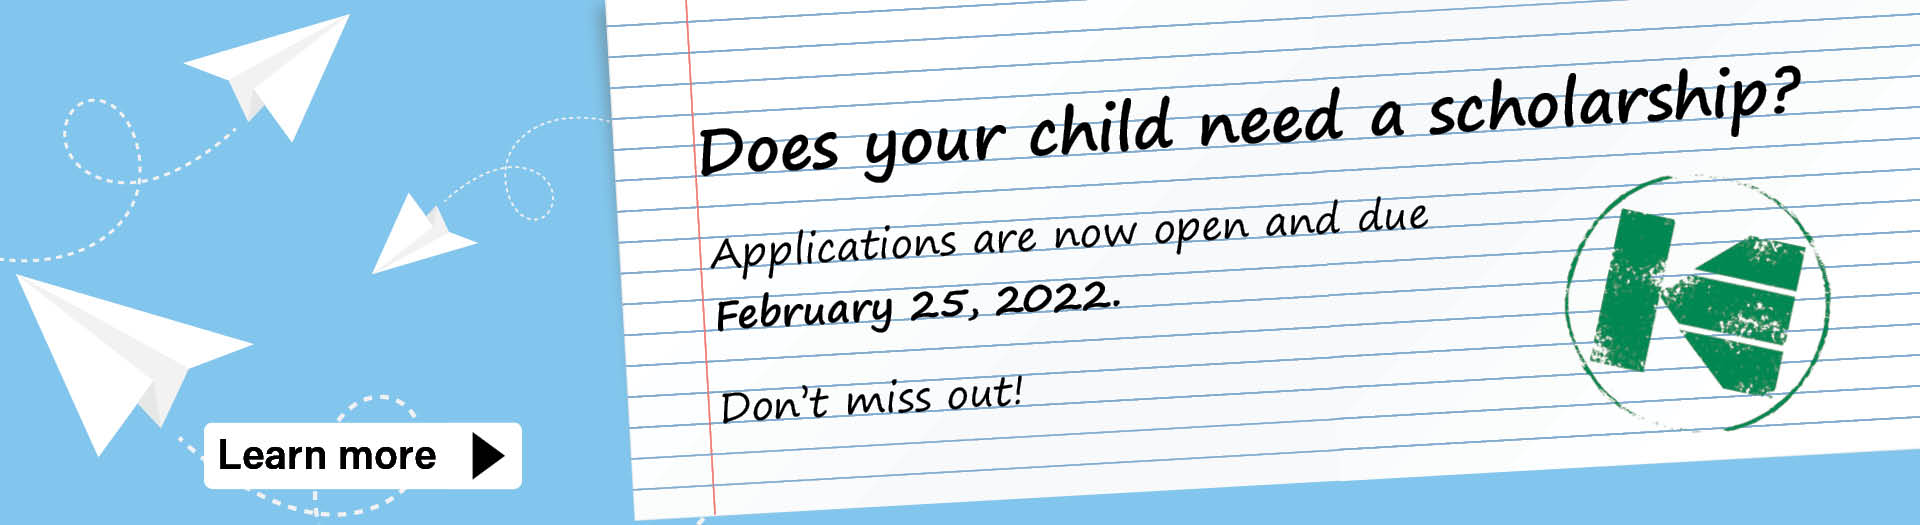 Does your child need a scholarship? Applications are now open and due February 25, 2022. Don’t miss out! 